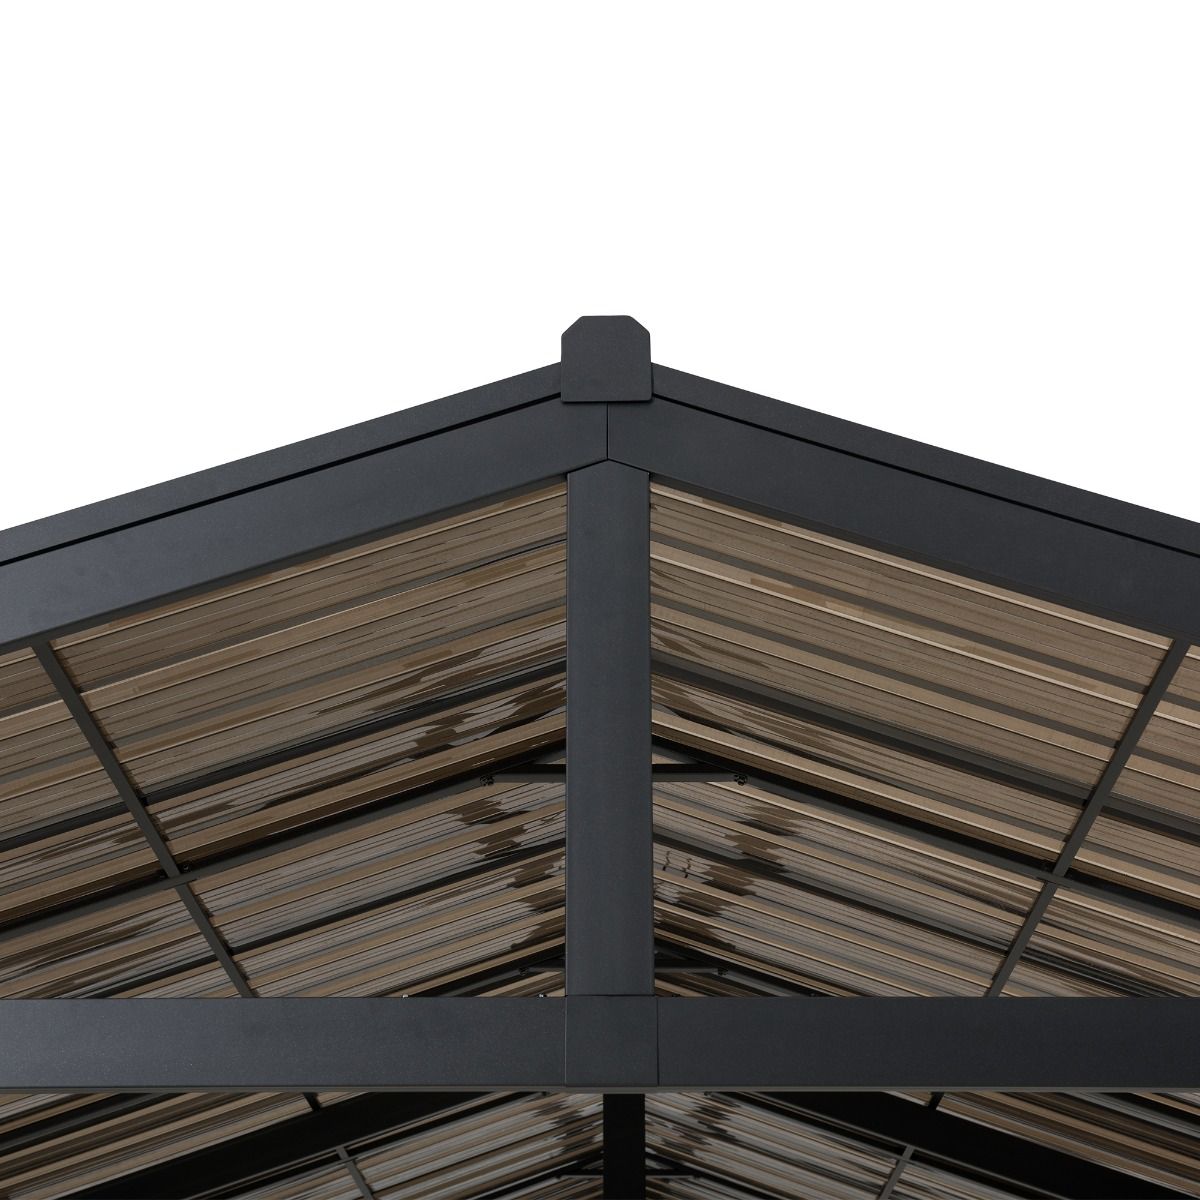 AutoCove 20 ft. W x 14 ft. D x 10 ft. H Newville Carport with Brown  Polycarbonate Top